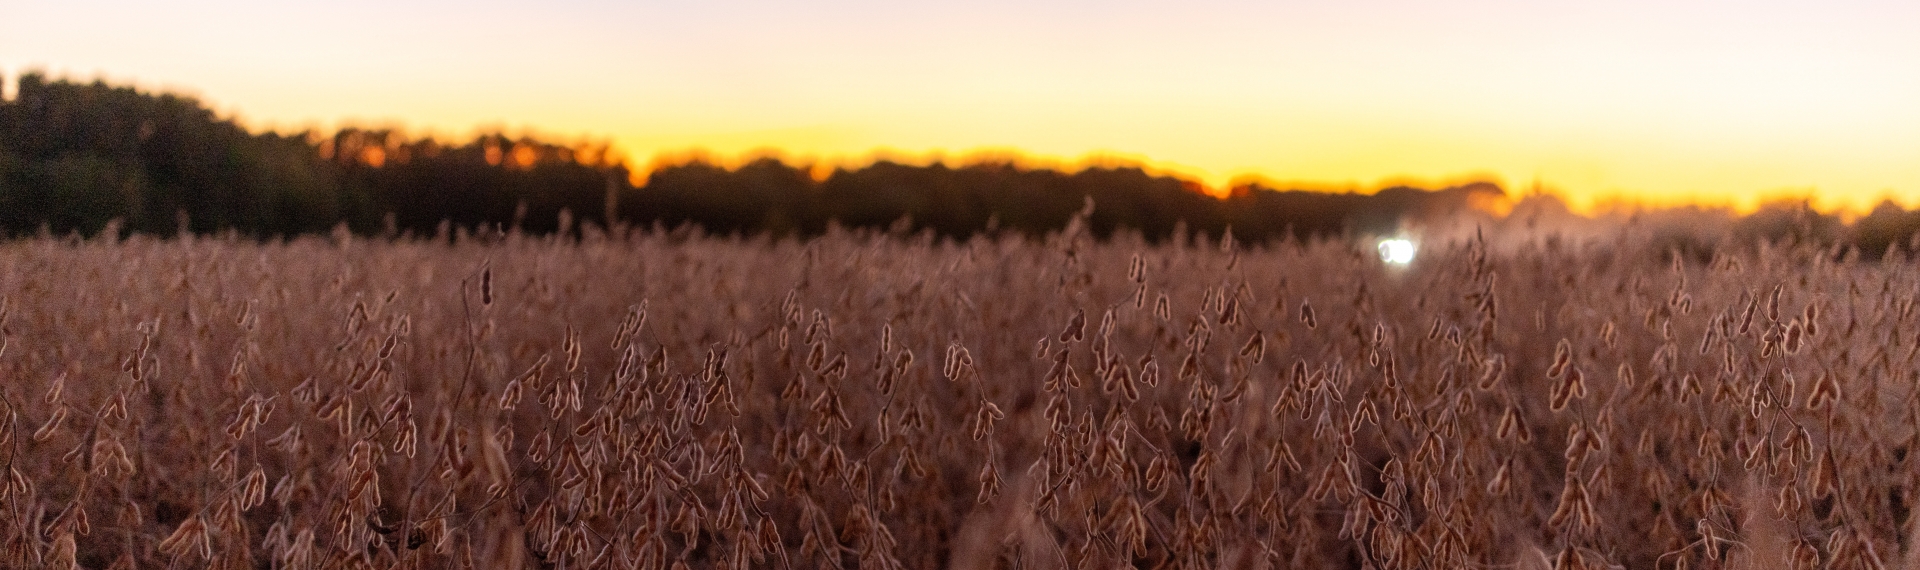 Soybean Field at sunset with combine in background.